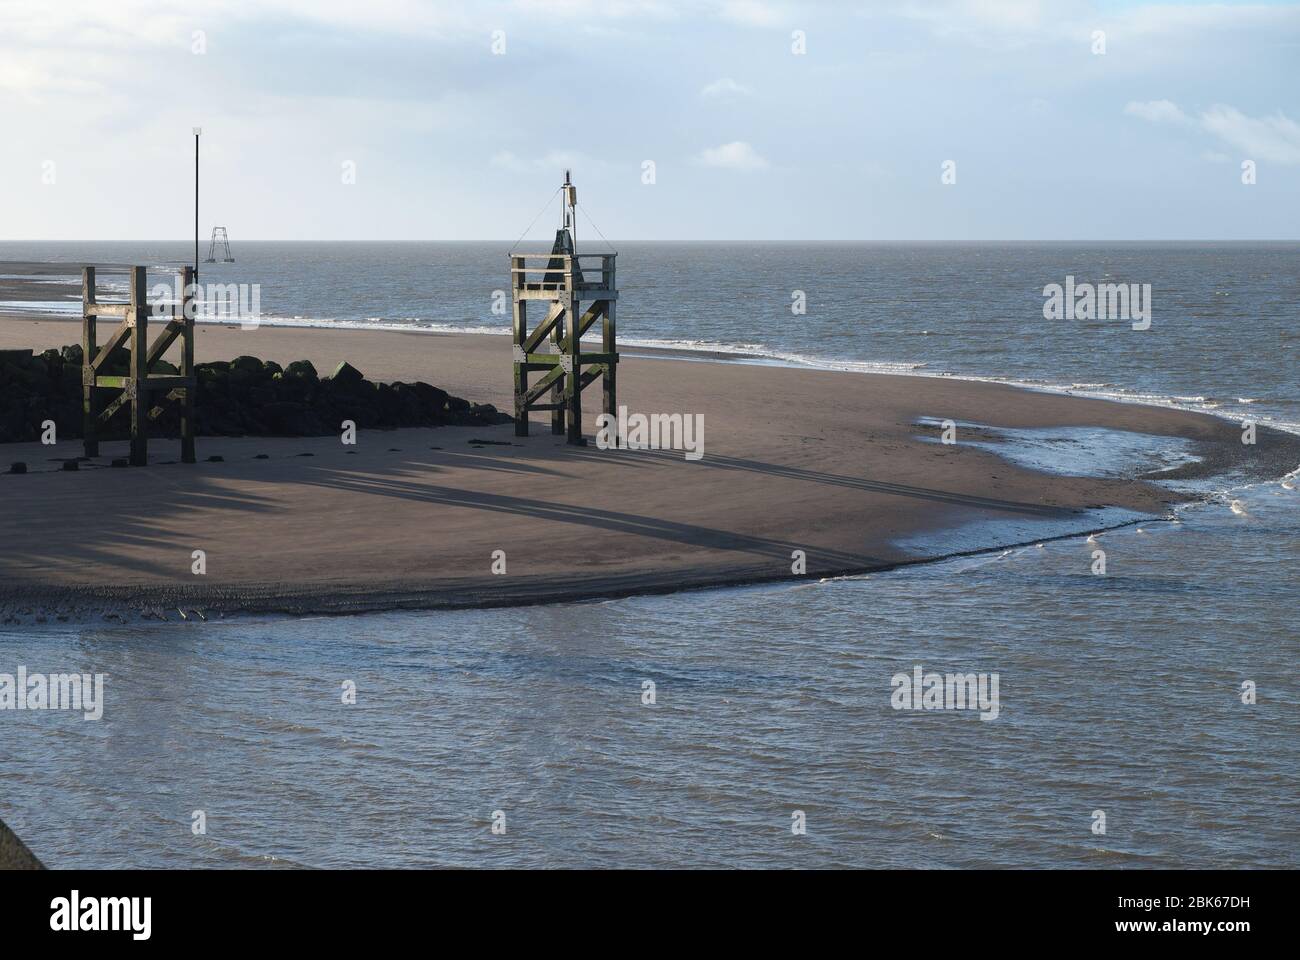 Entrance to the port of Silloth on the Solway Firth, Cumbria Stock Photo